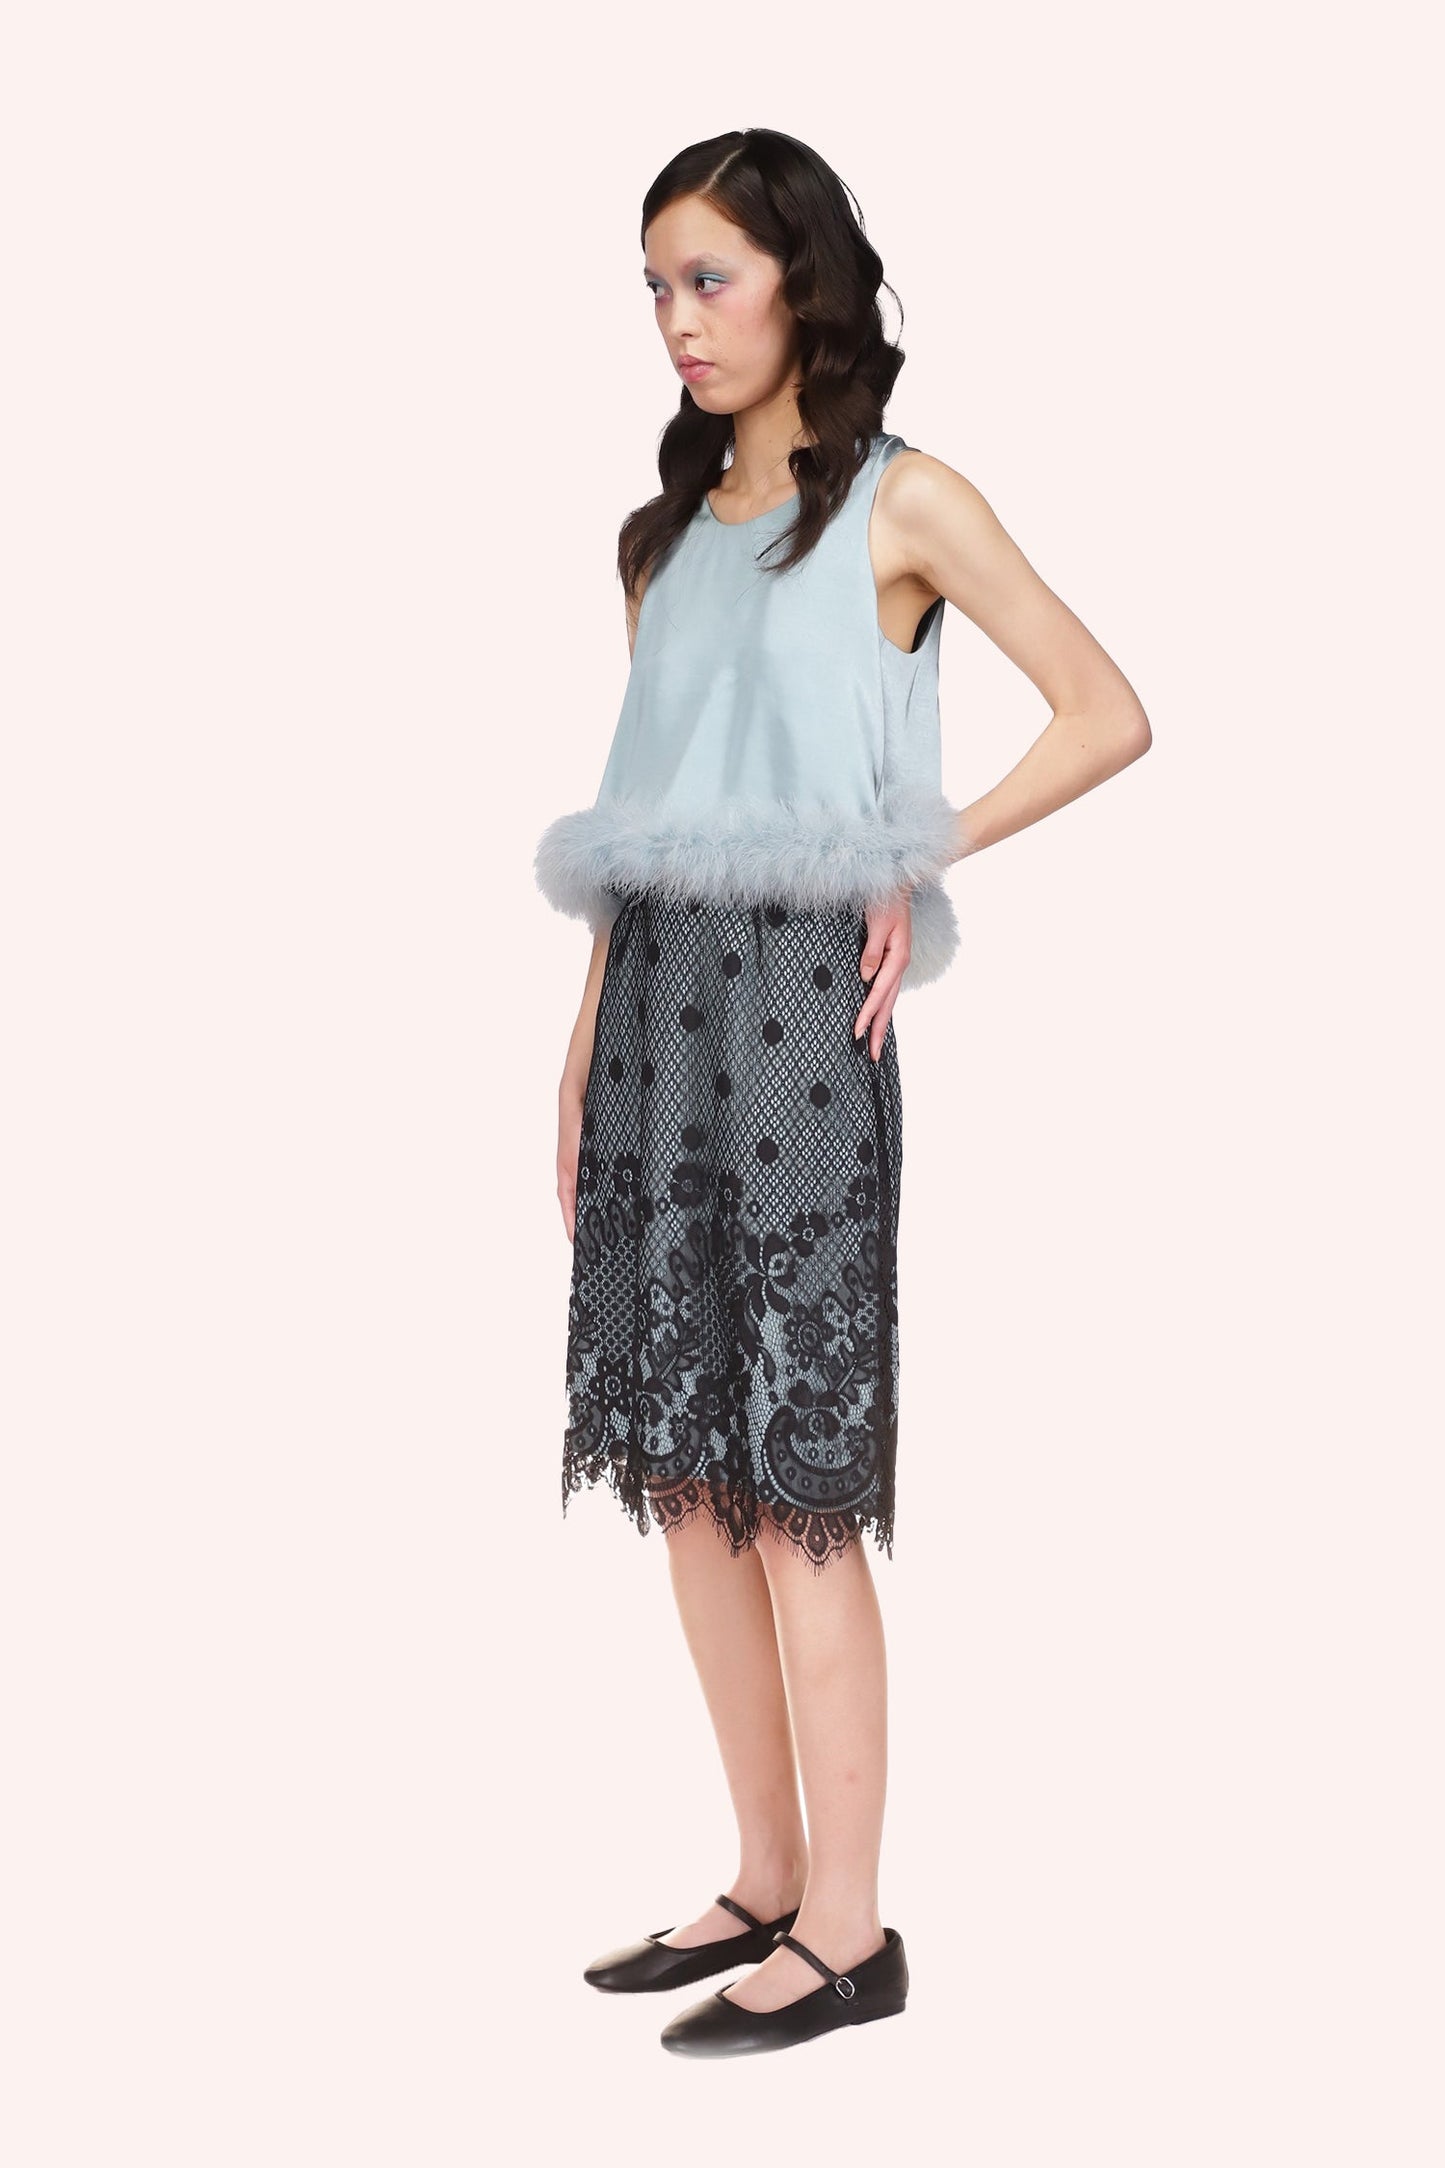 Washed Satin With Lace Top Trimmed With Marabou Feather